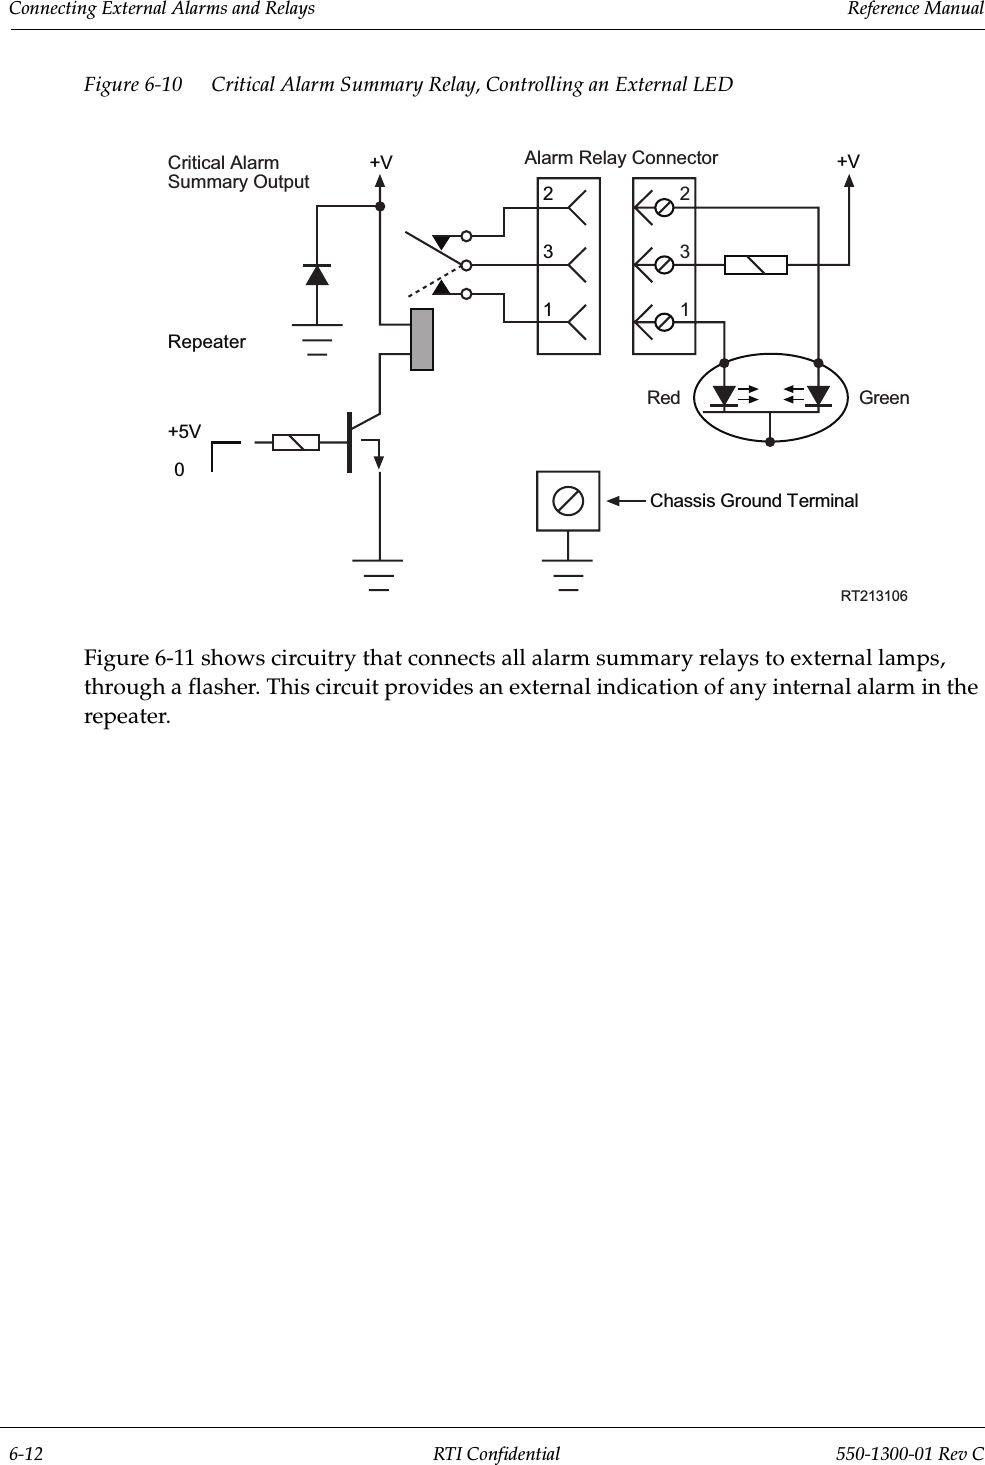 Connecting External Alarms and Relays                 Reference Manual6-12 RTI Confidential 550-1300-01 Rev CFigure 6-10 Critical Alarm Summary Relay, Controlling an External LEDFigure 6-11 shows circuitry that connects all alarm summary relays to external lamps, through a flasher. This circuit provides an external indication of any internal alarm in the repeater.+VRepeater+5V0132RT213106Critical AlarmSummary Output 231Chassis Ground TerminalRed Green+VAlarm Relay Connector